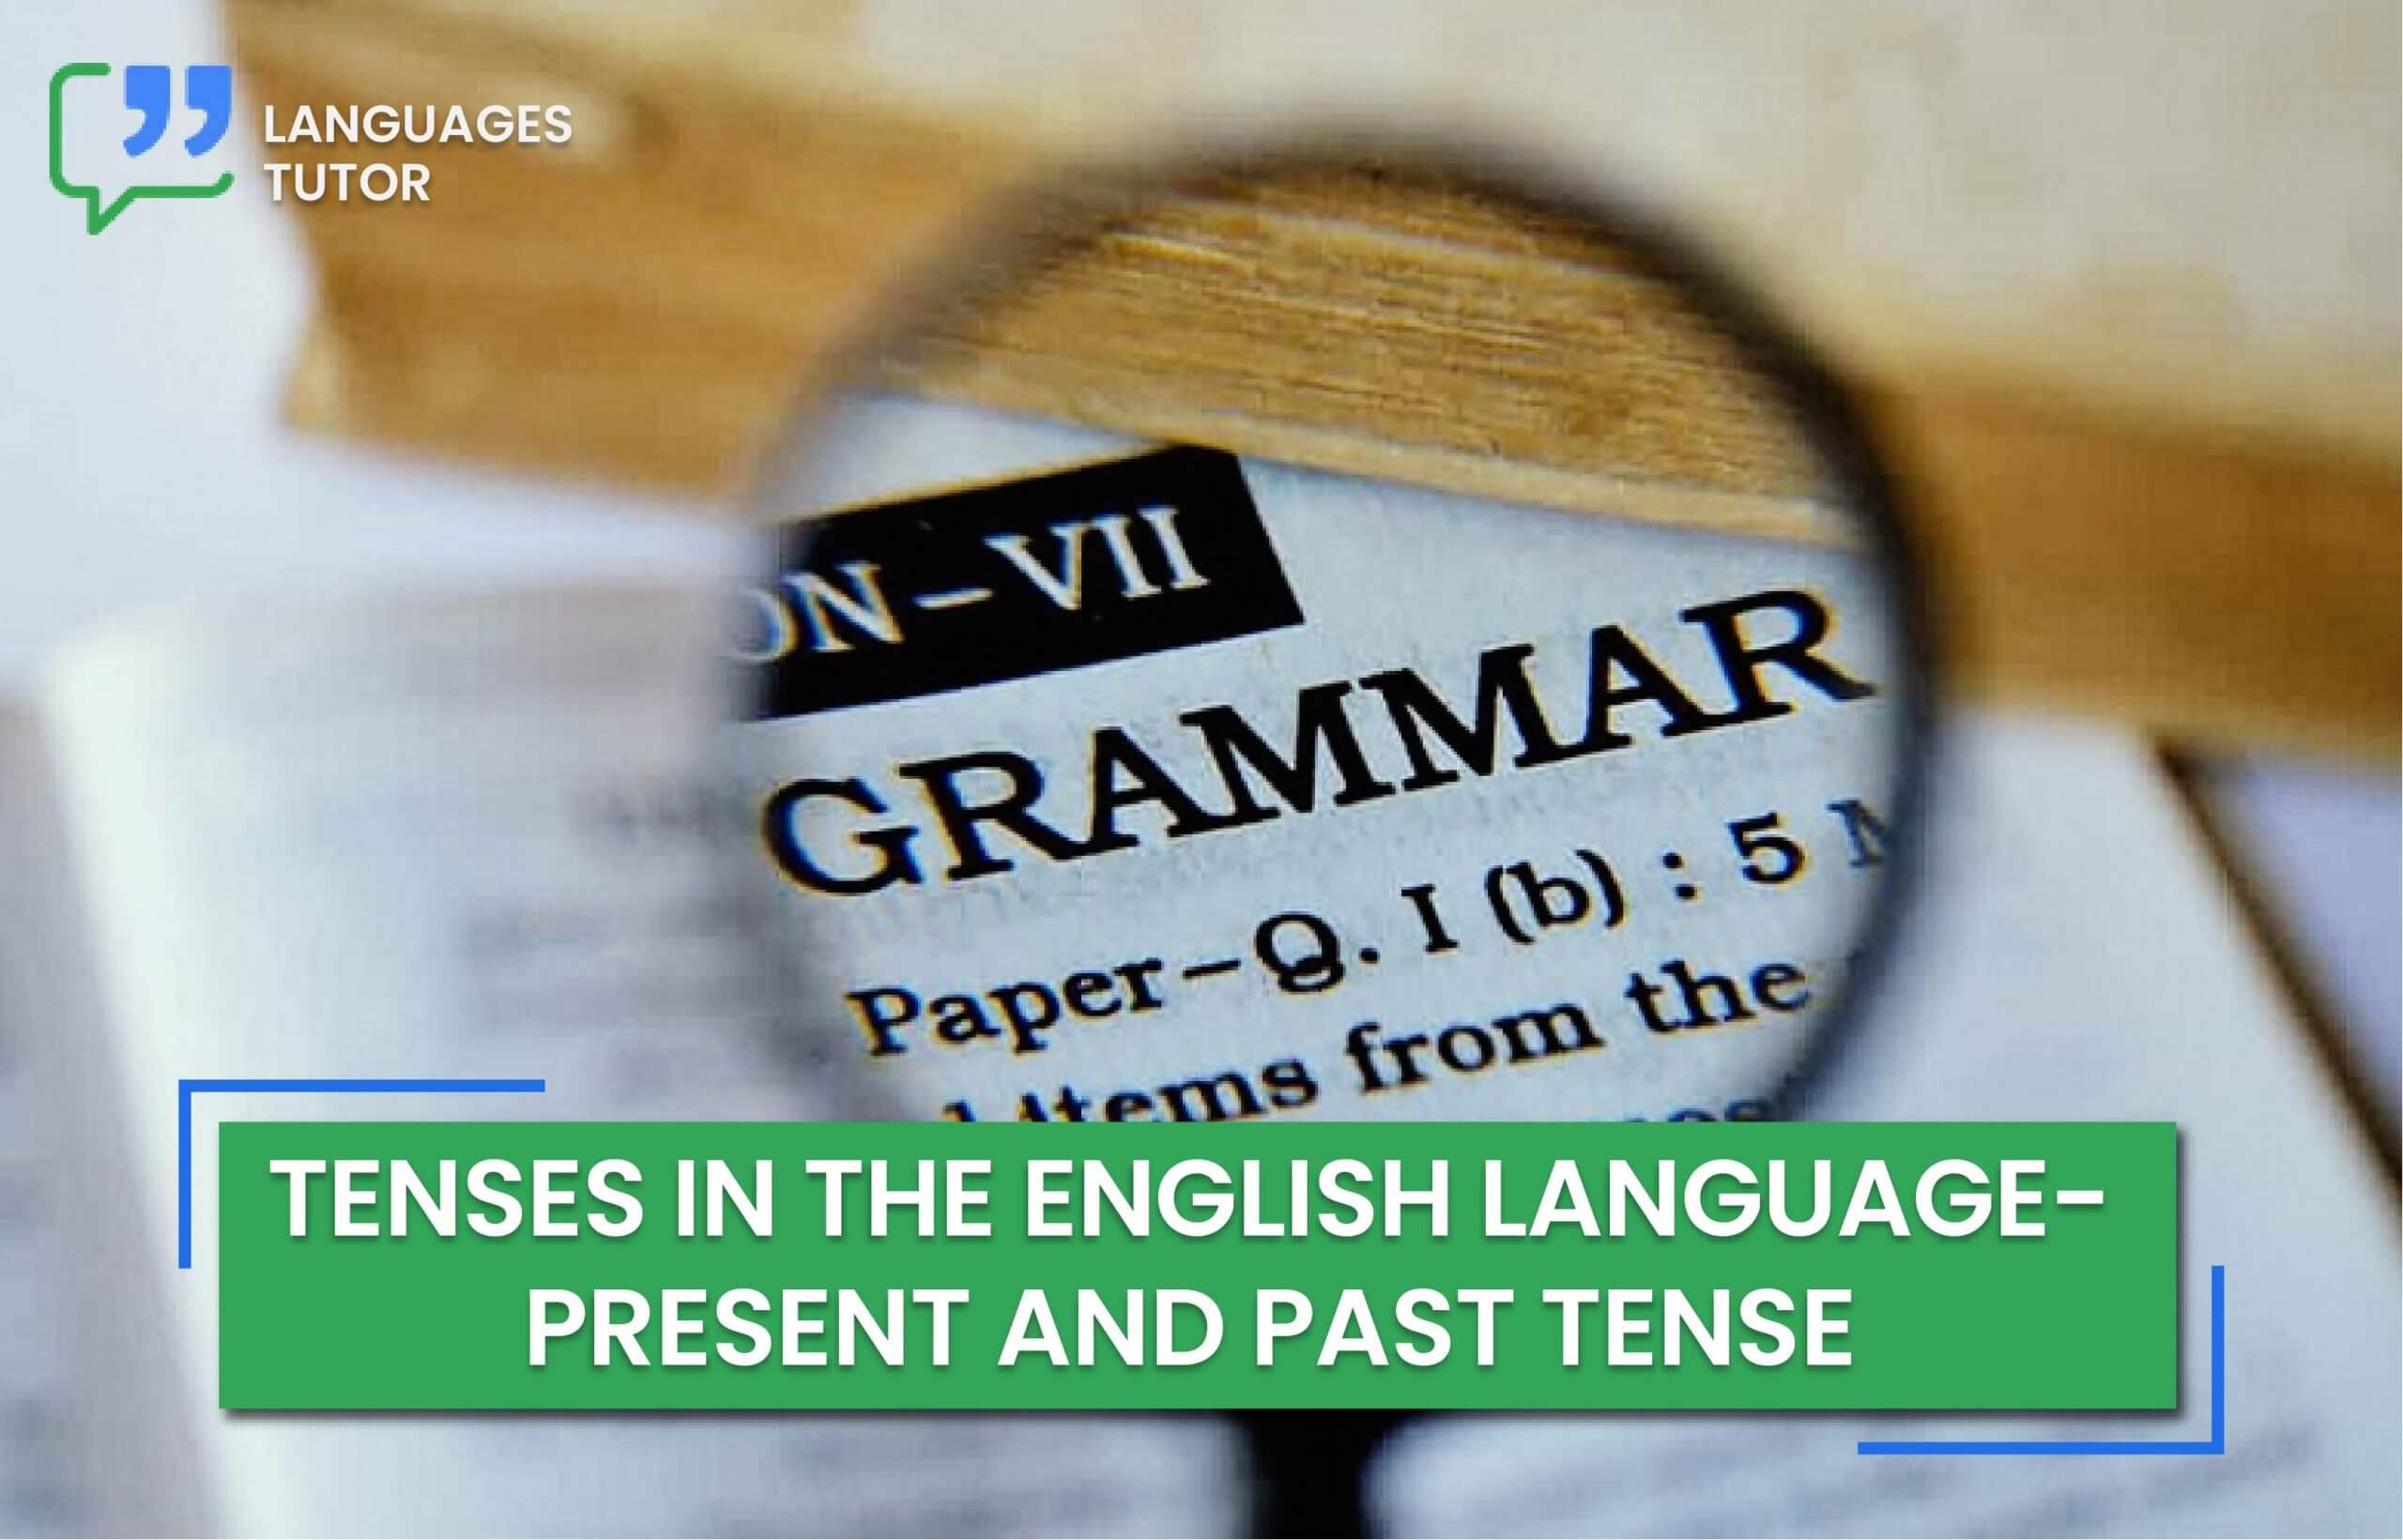 Tenses in the English Language - Present and Past Tense